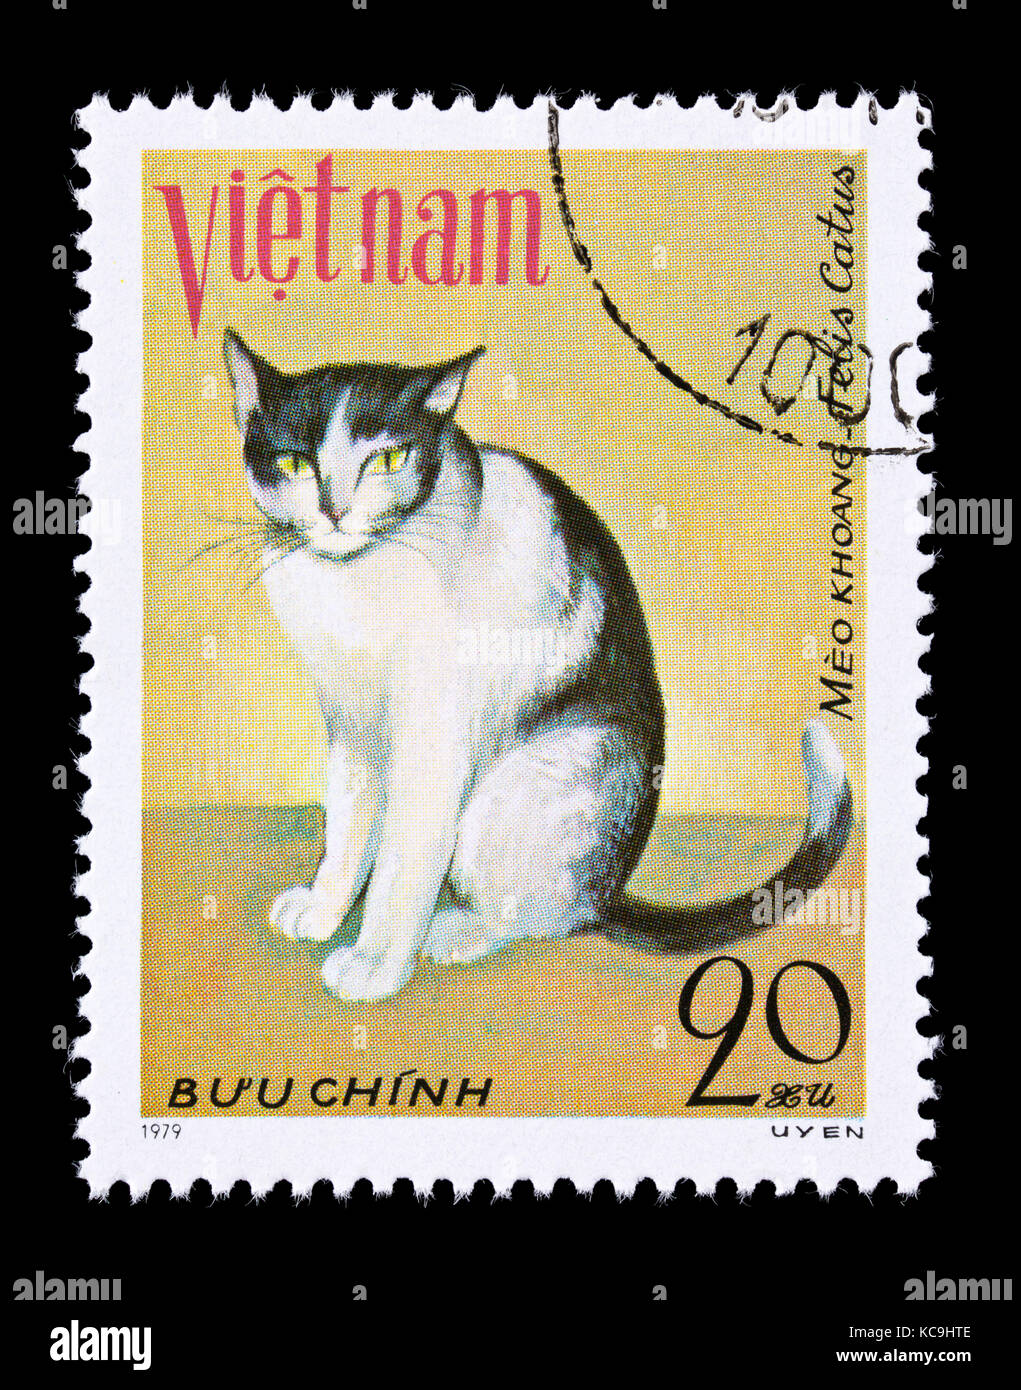 Postage stamp from Vietnam depicting a housecat. Stock Photo